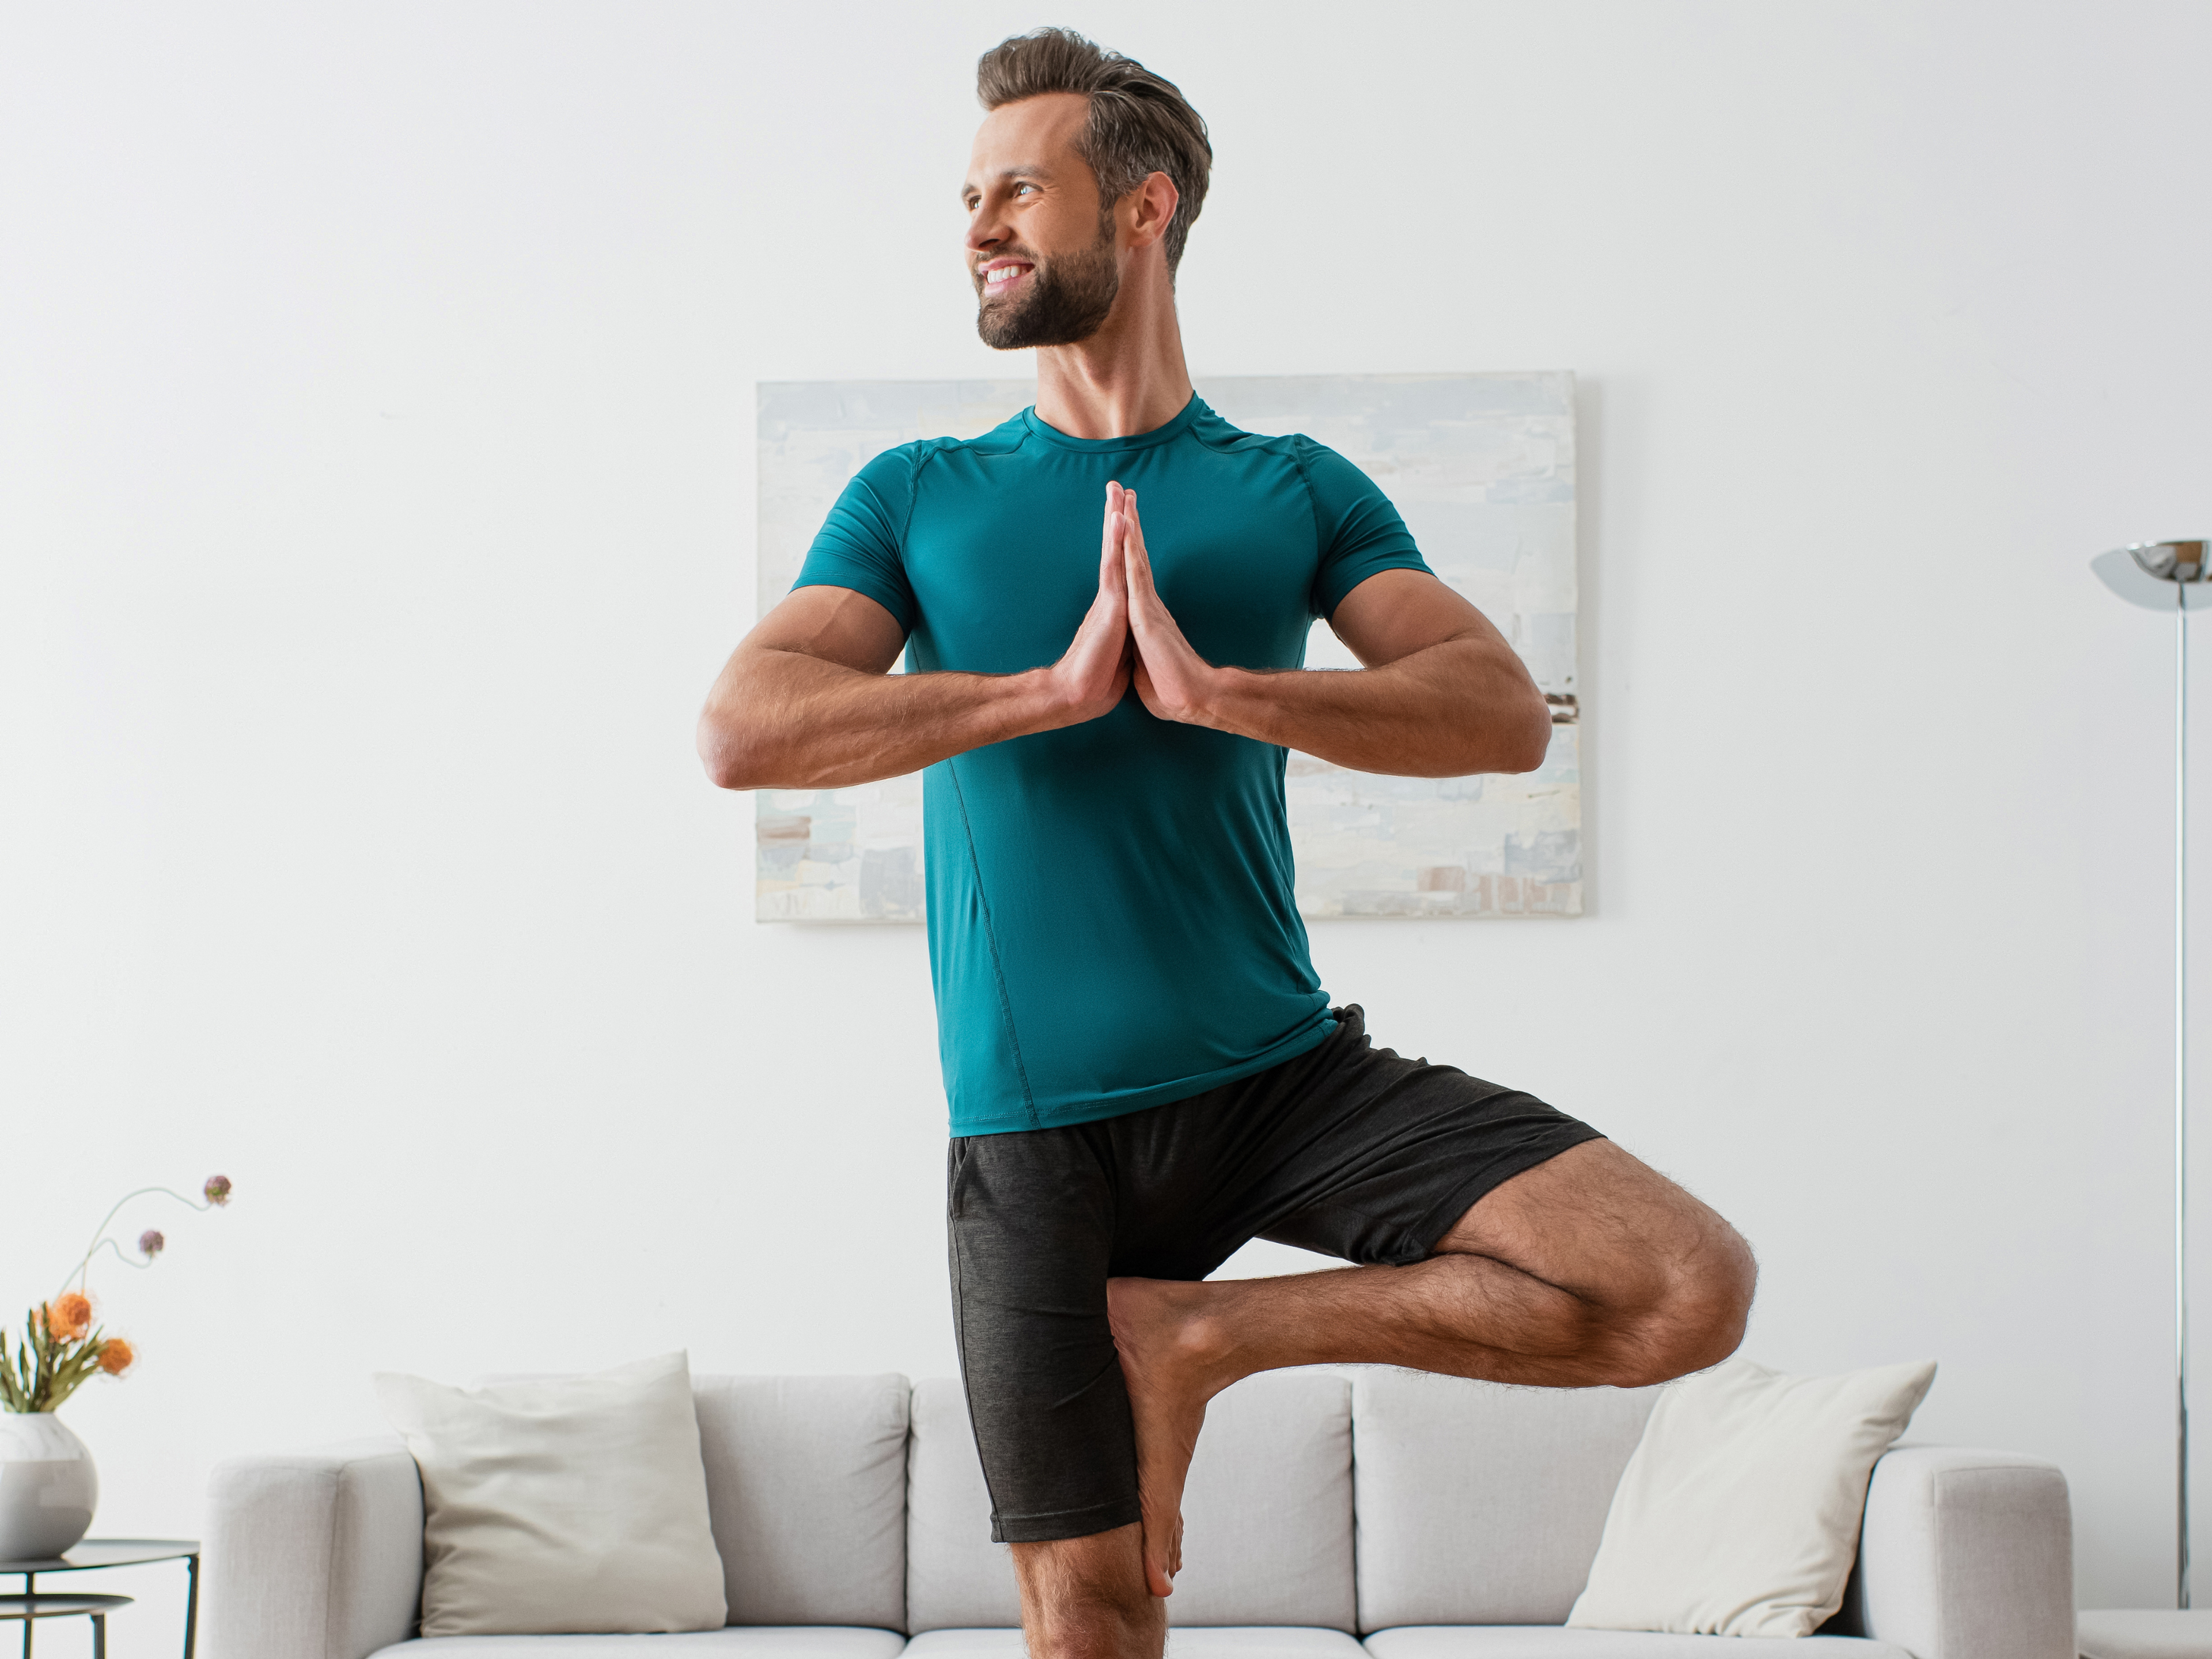 Single-leg balance is an exercise that should be included in your patellofemoral pain syndrome rehab.